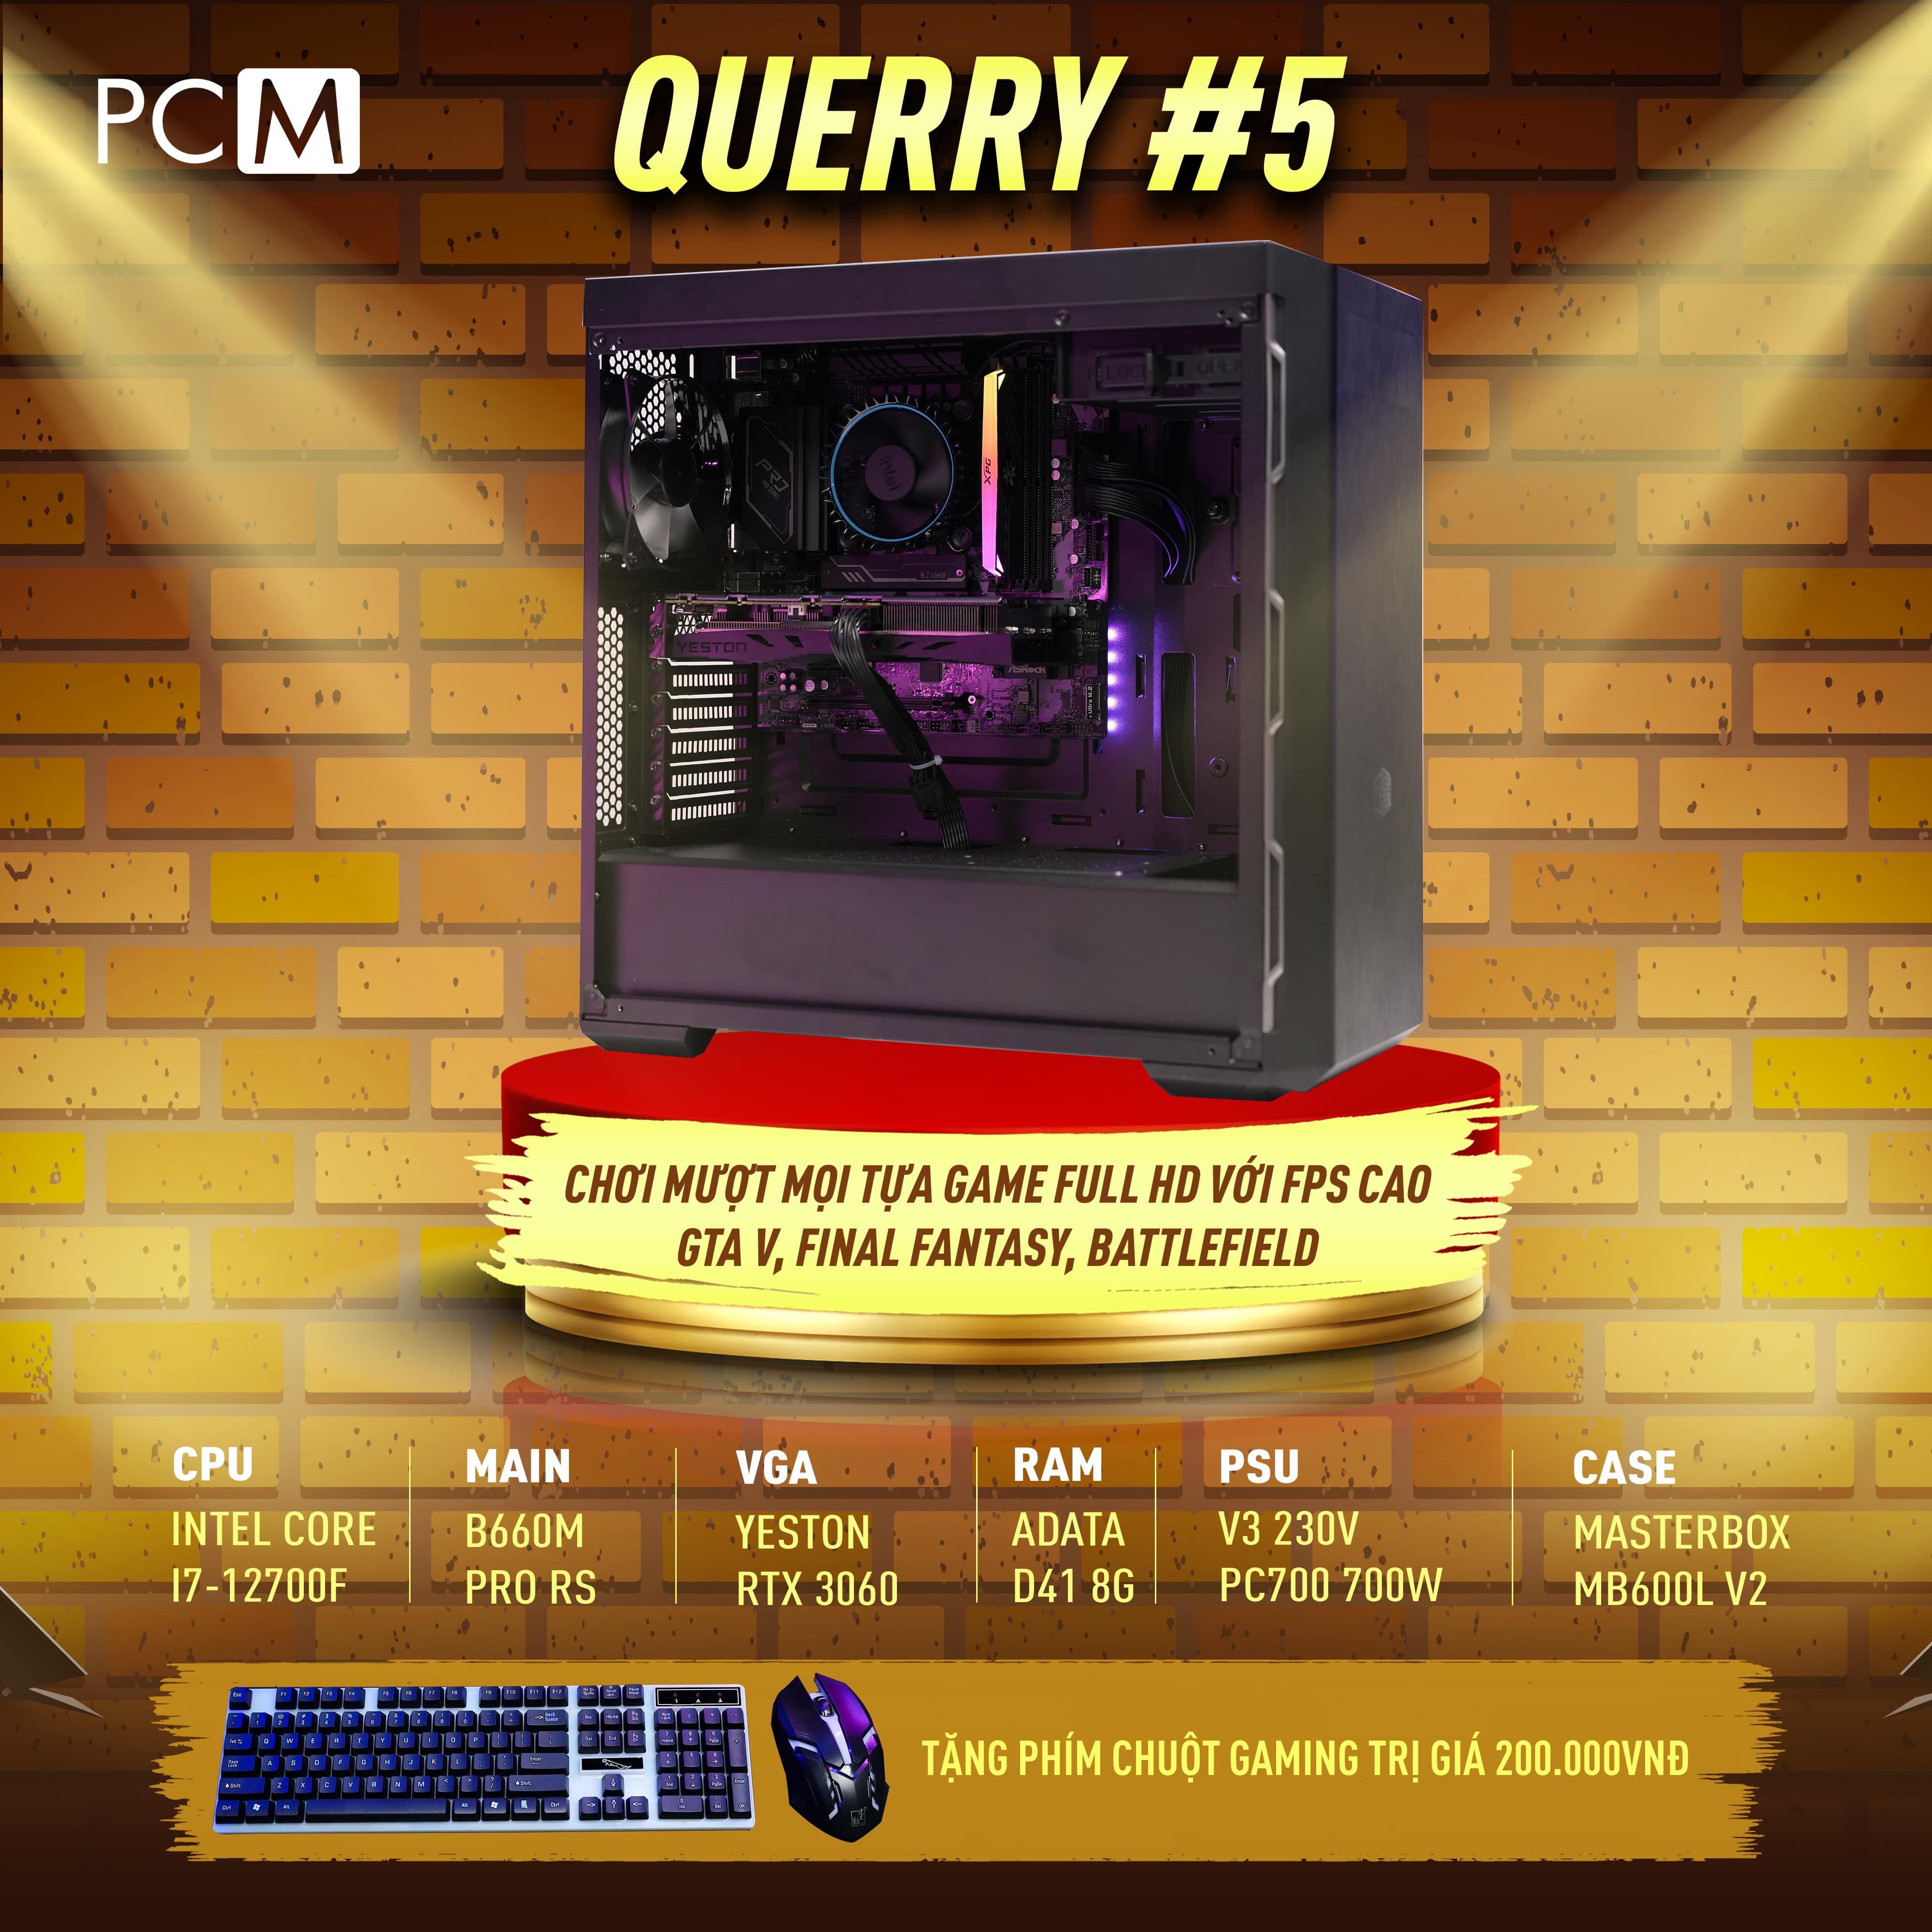 Bộ PC QUERRY #5